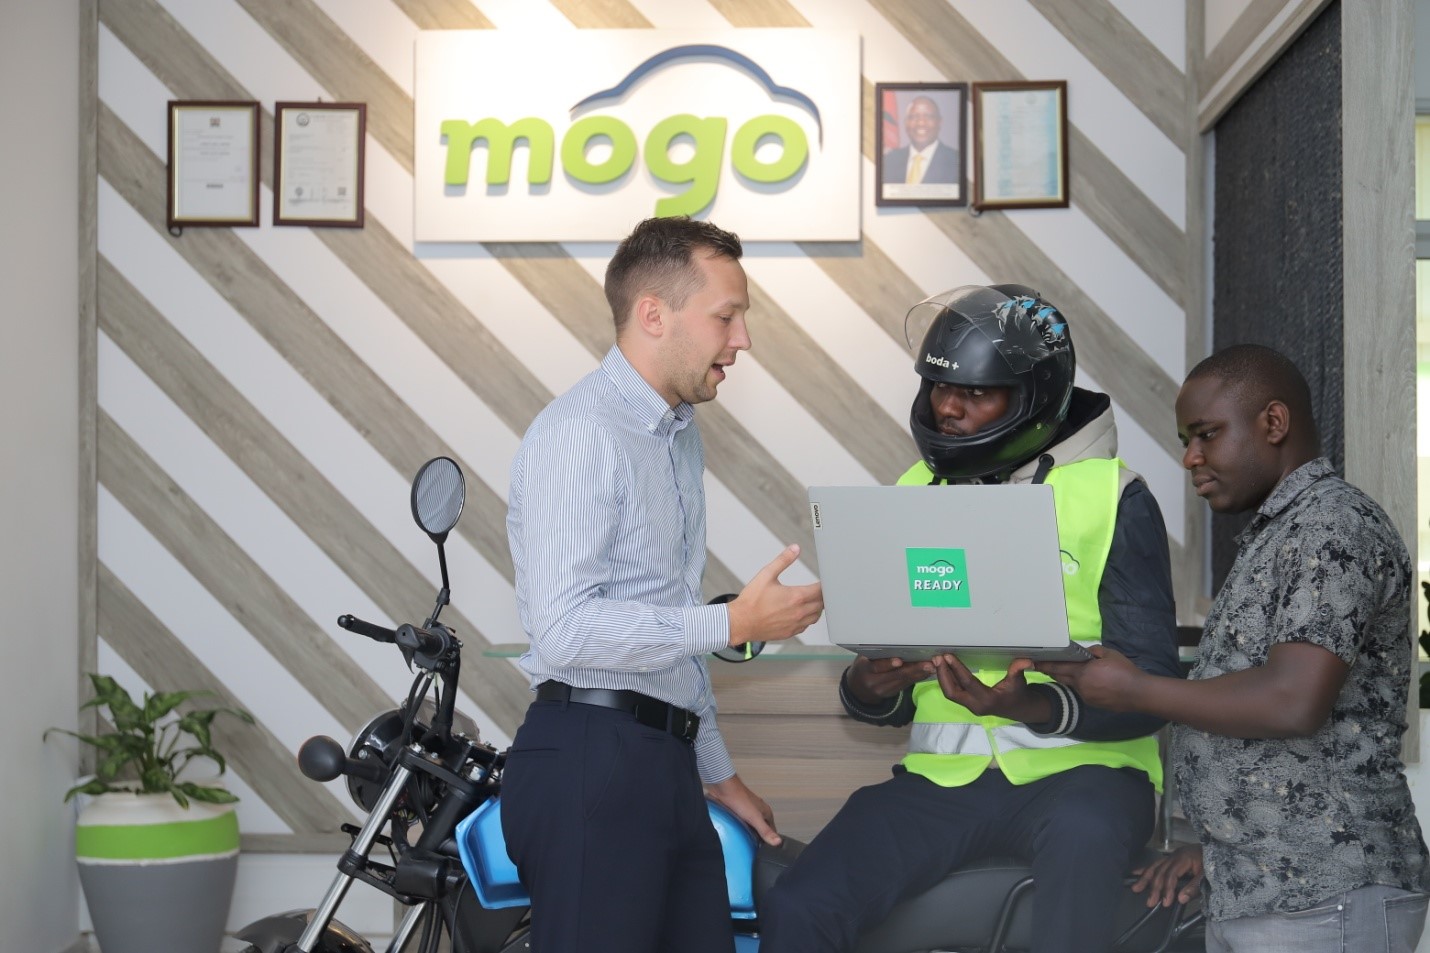 From Left: MOGO Kenya country manager Domas Mineikis, Boda Boda operator Elijah Kambati and MOGO’s head of underwriting Chris Murimi during the launch of the financial literacy tool. The tool is meant to give consumers a complete real time overview of their financial lives and wellness through a single digital platform.